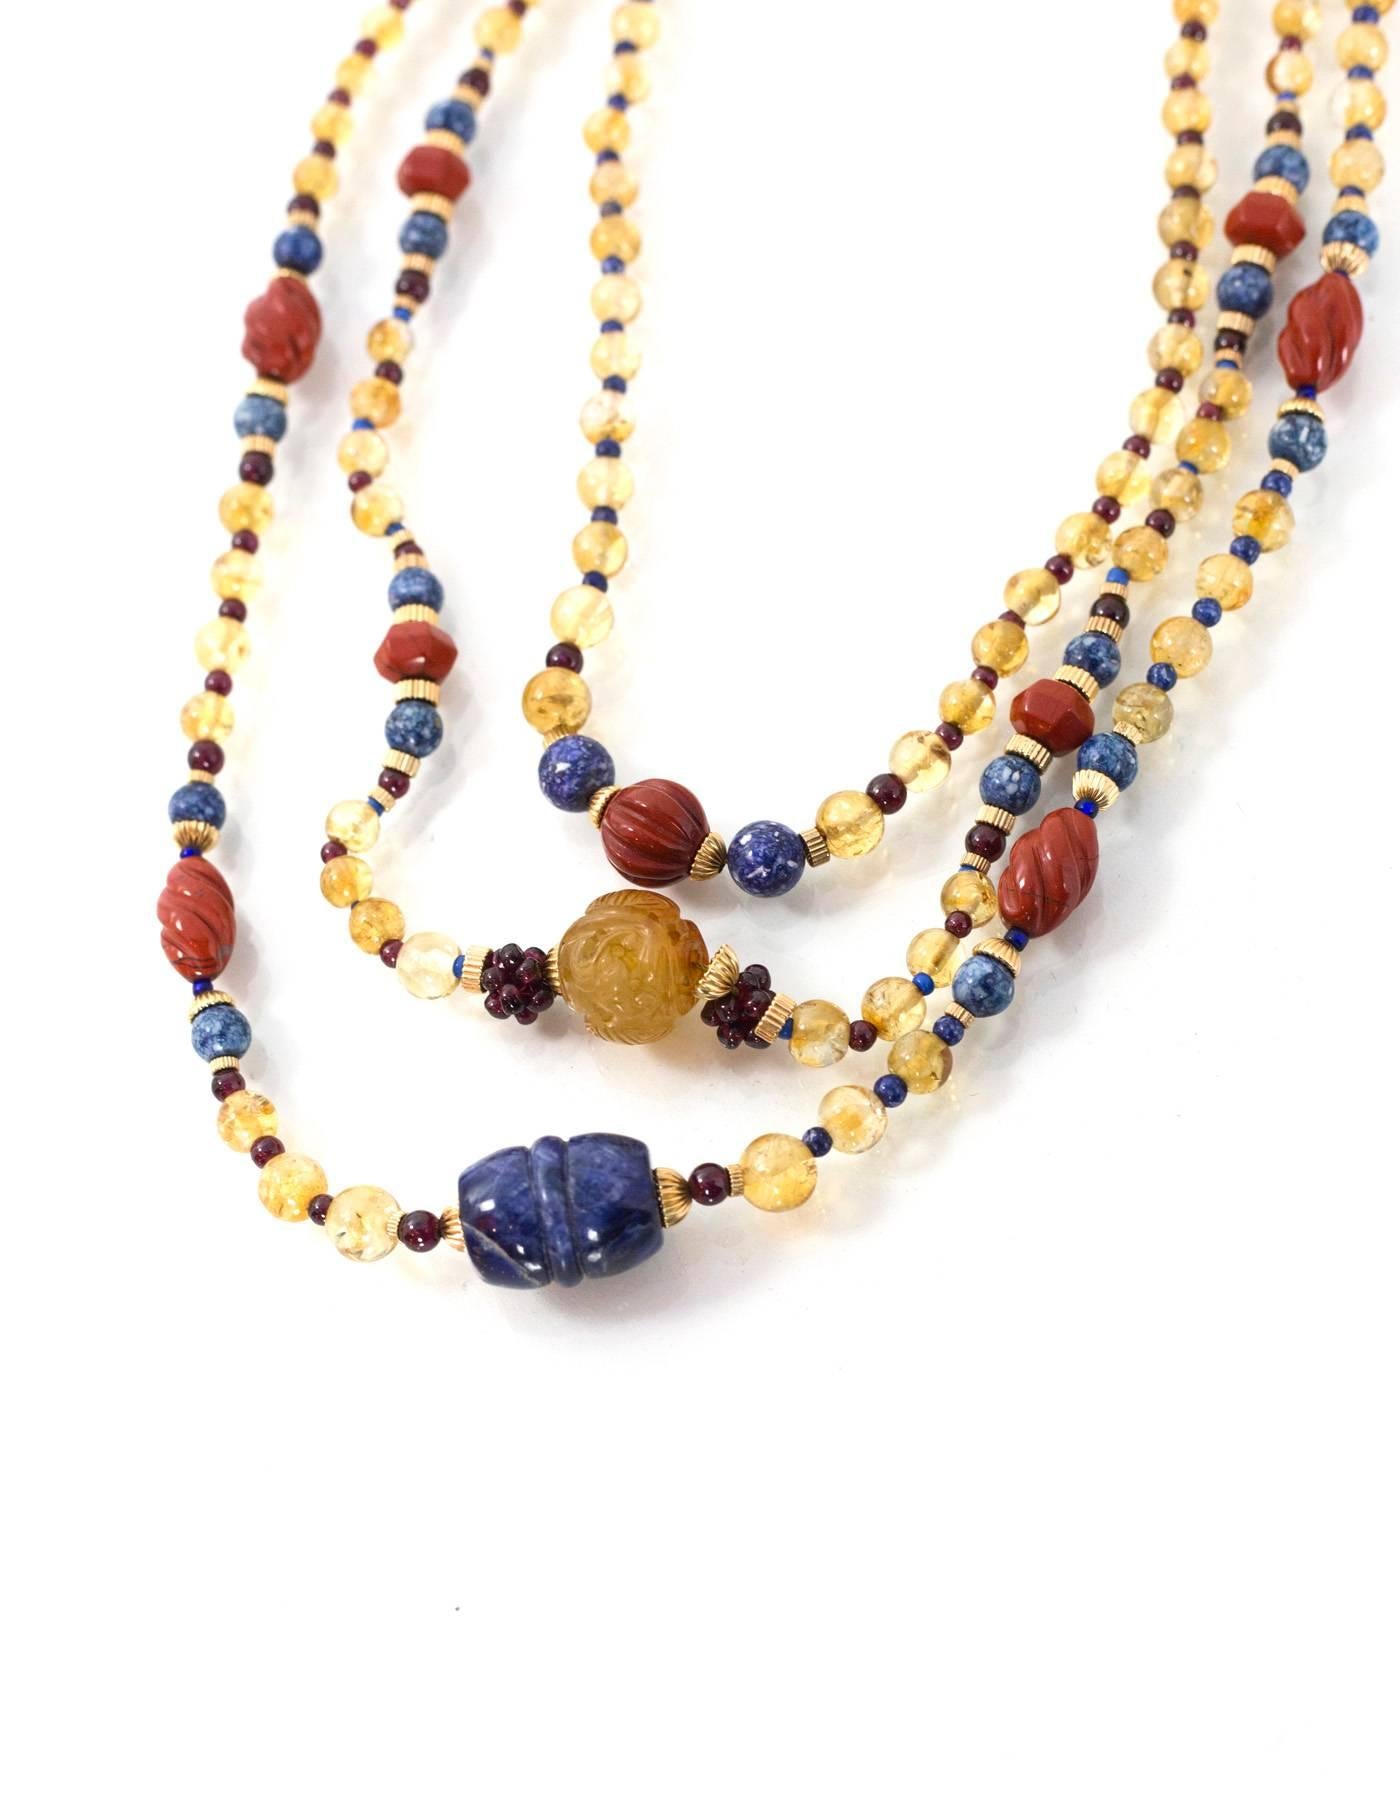 Multi-Colored 3 Strand Beaded Semi-Precious Stone Necklace 
Features vermeil hardware closure

Color: Blue, navy, burgundy, amber and citron
Materials: Semi-precious stones
Closure: Hook and eye closure
Stamp: Sterling
Overall Condition: Excellent